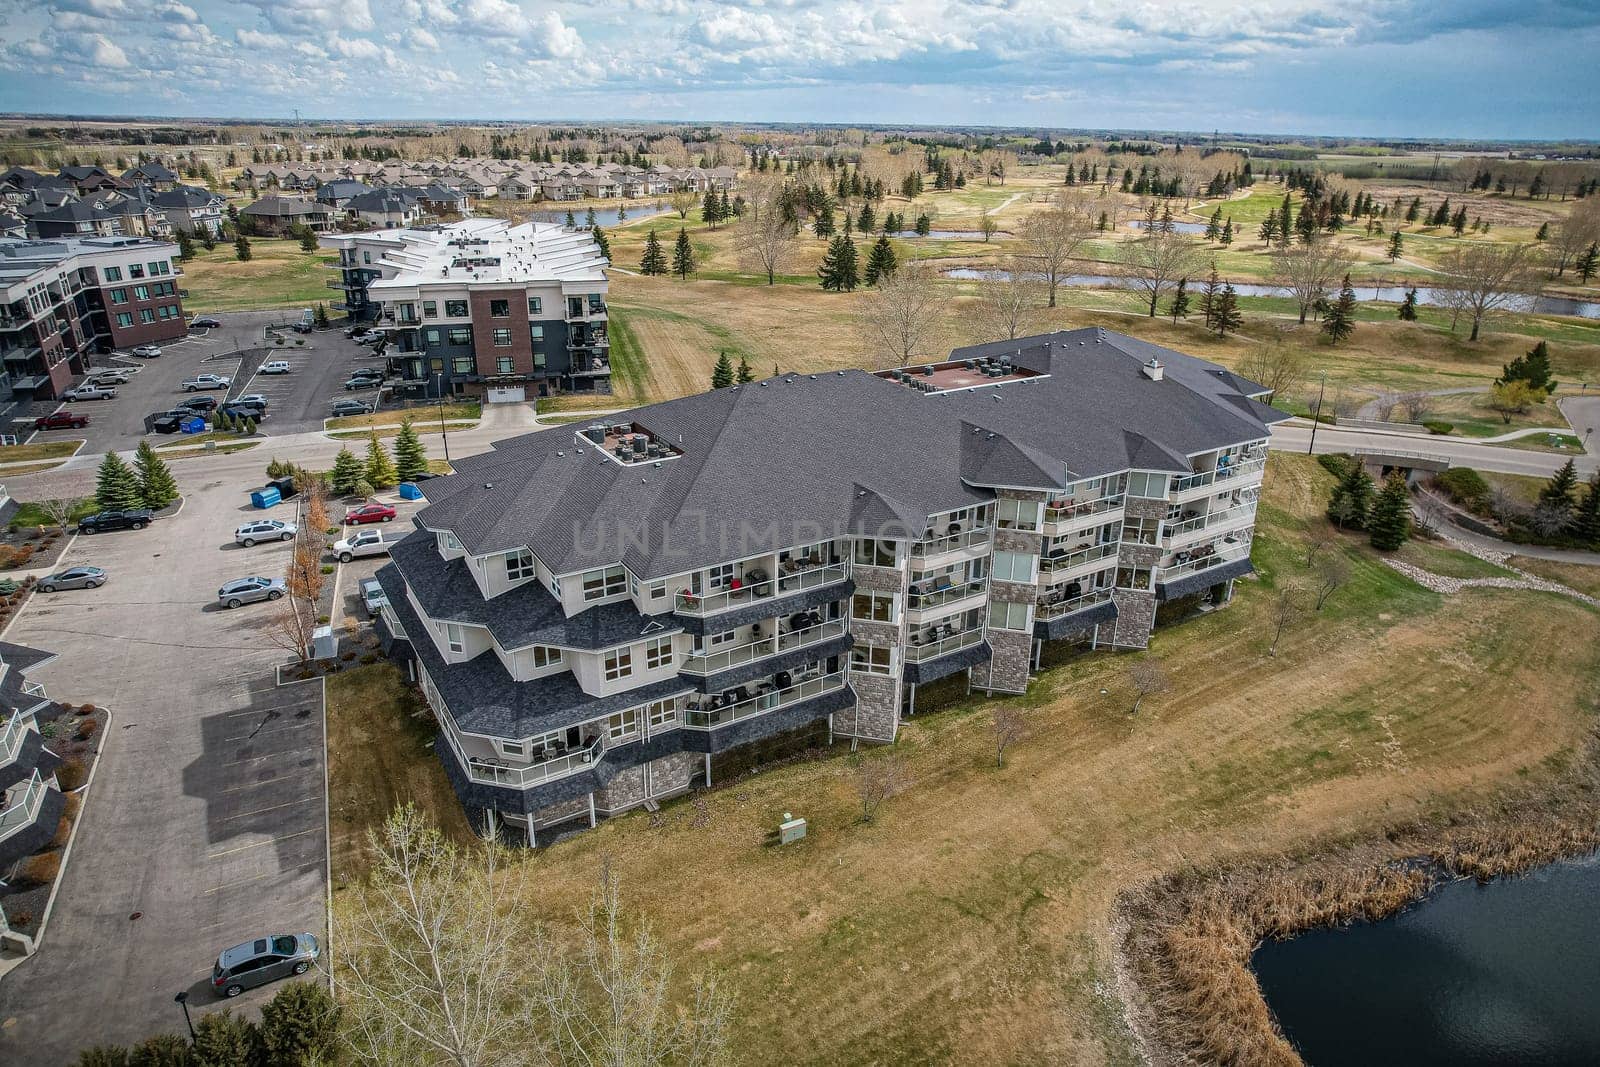 Drone image of The Willows, Saskatoon, highlighting its luxury homes and golf course.